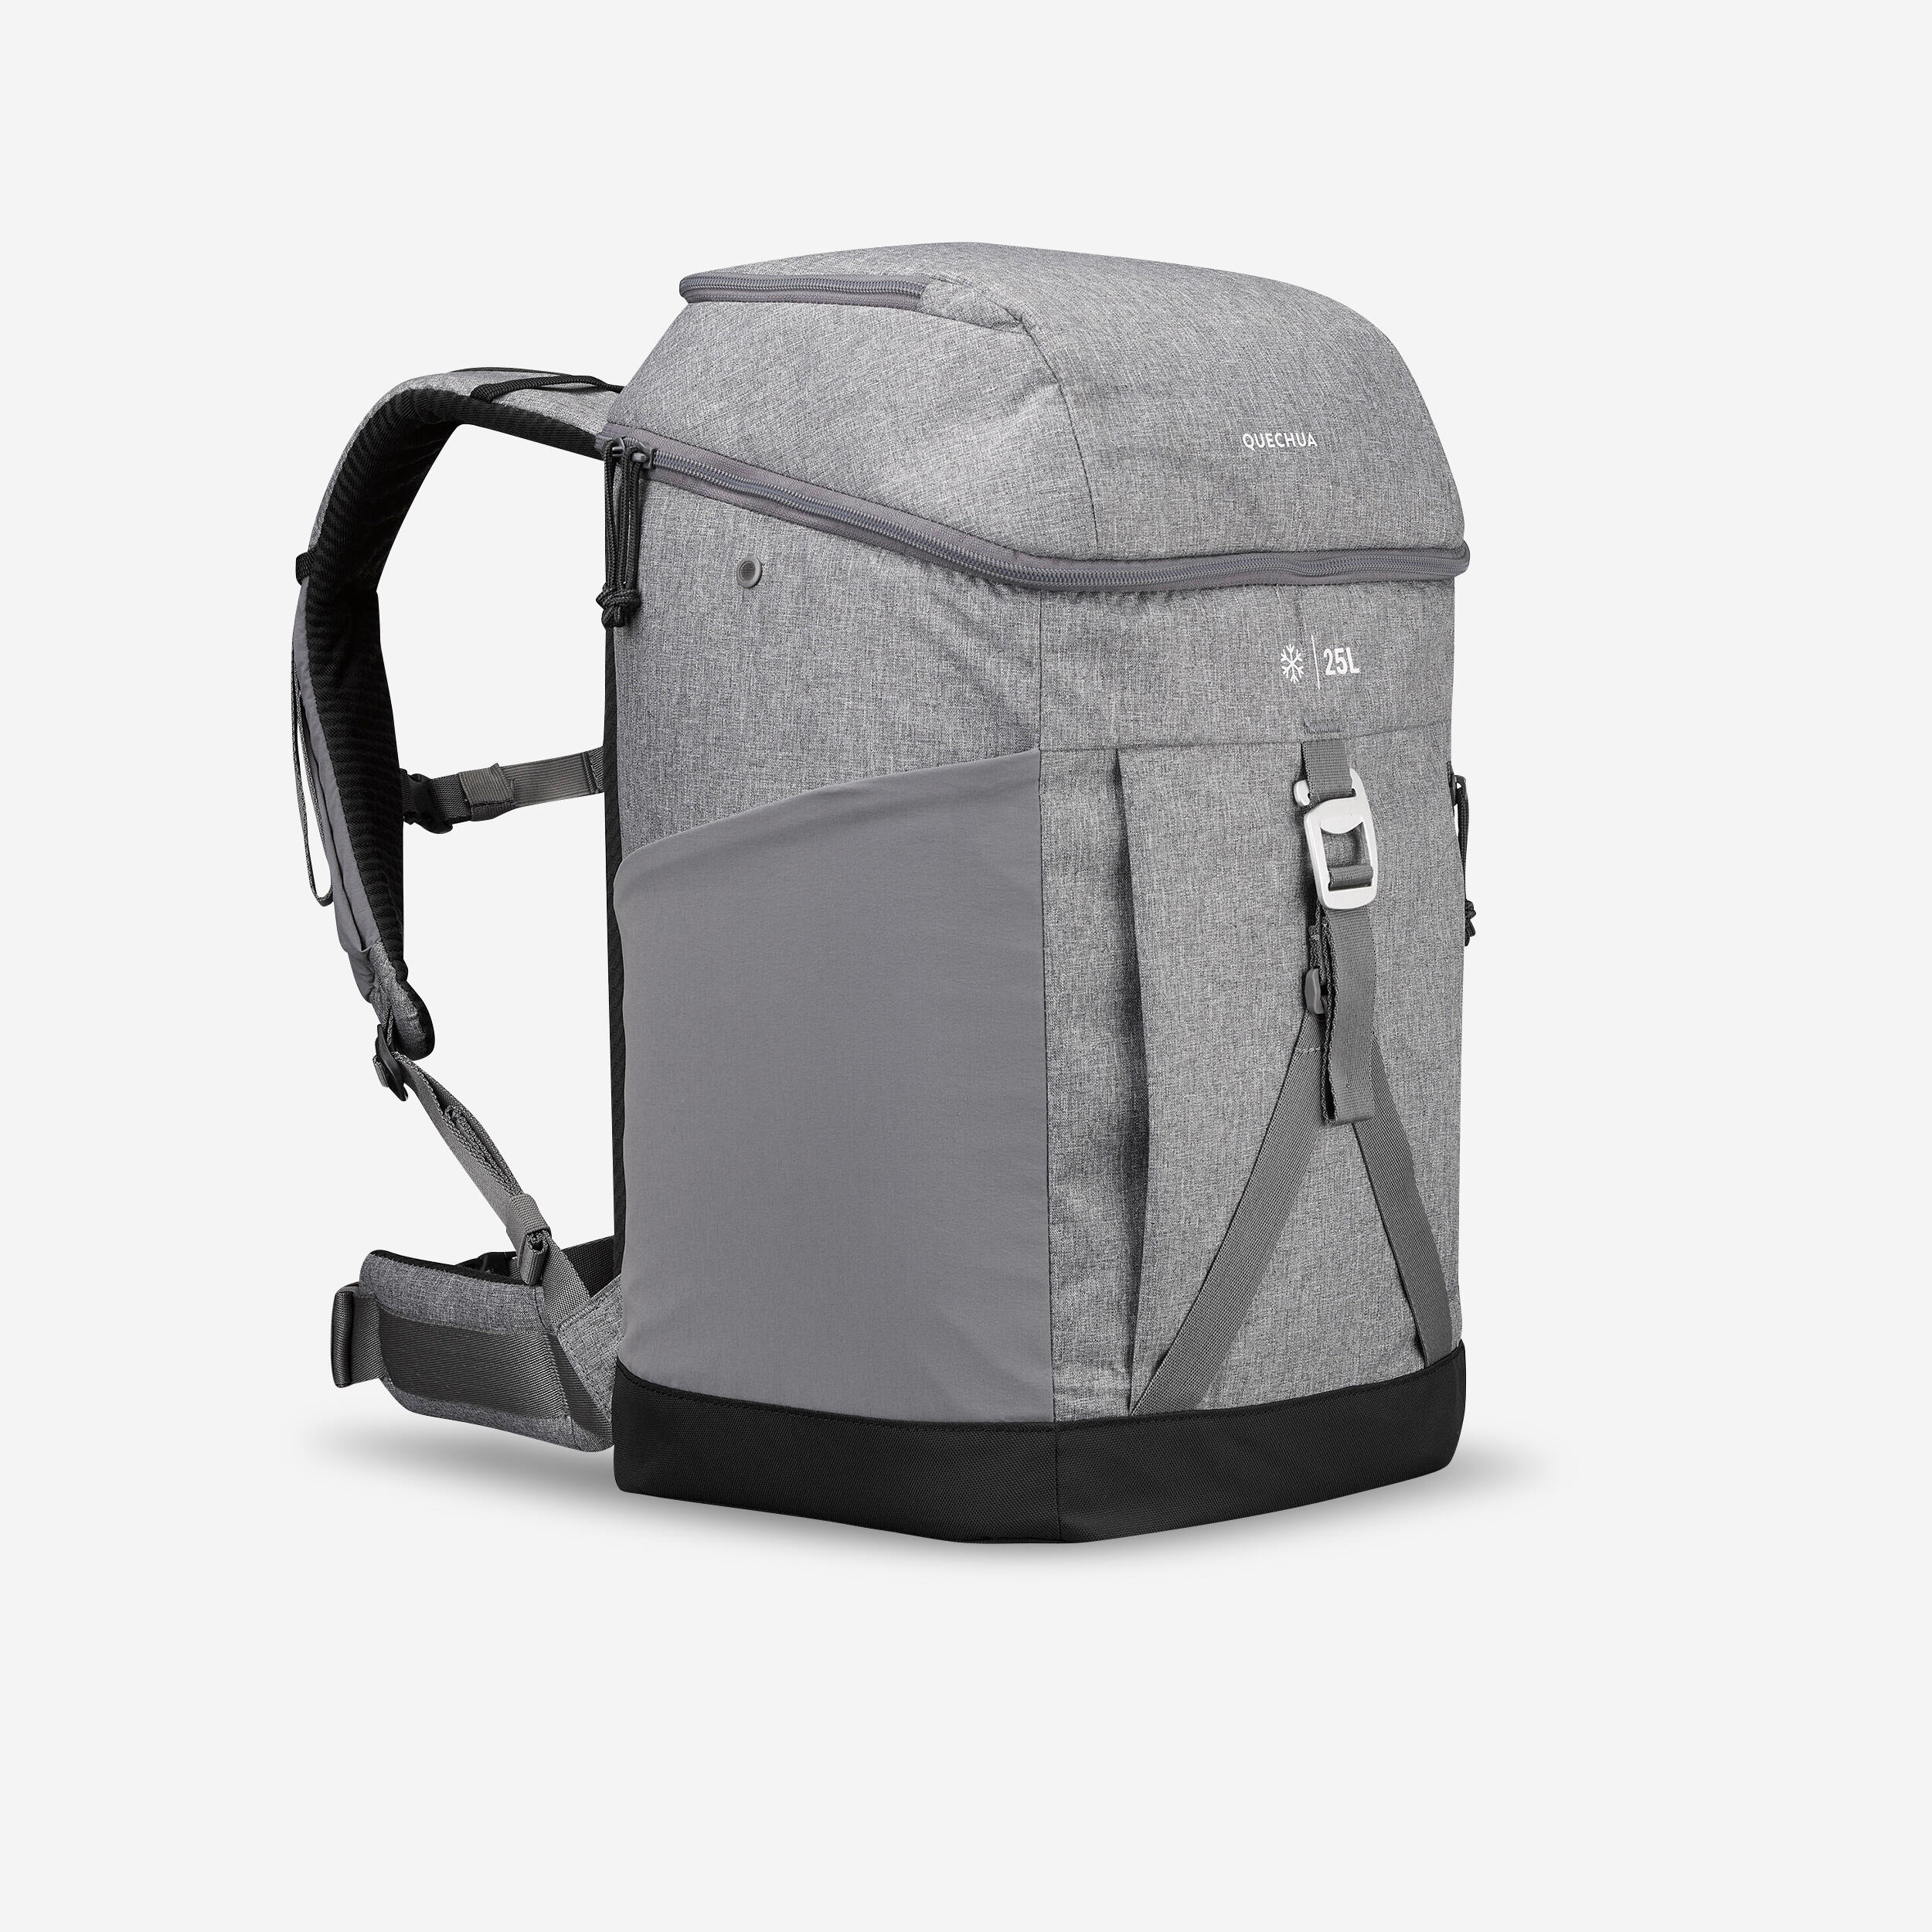 Quechua Isothermal Backpack 25 L - Nh500 Ice Compact - 25 L